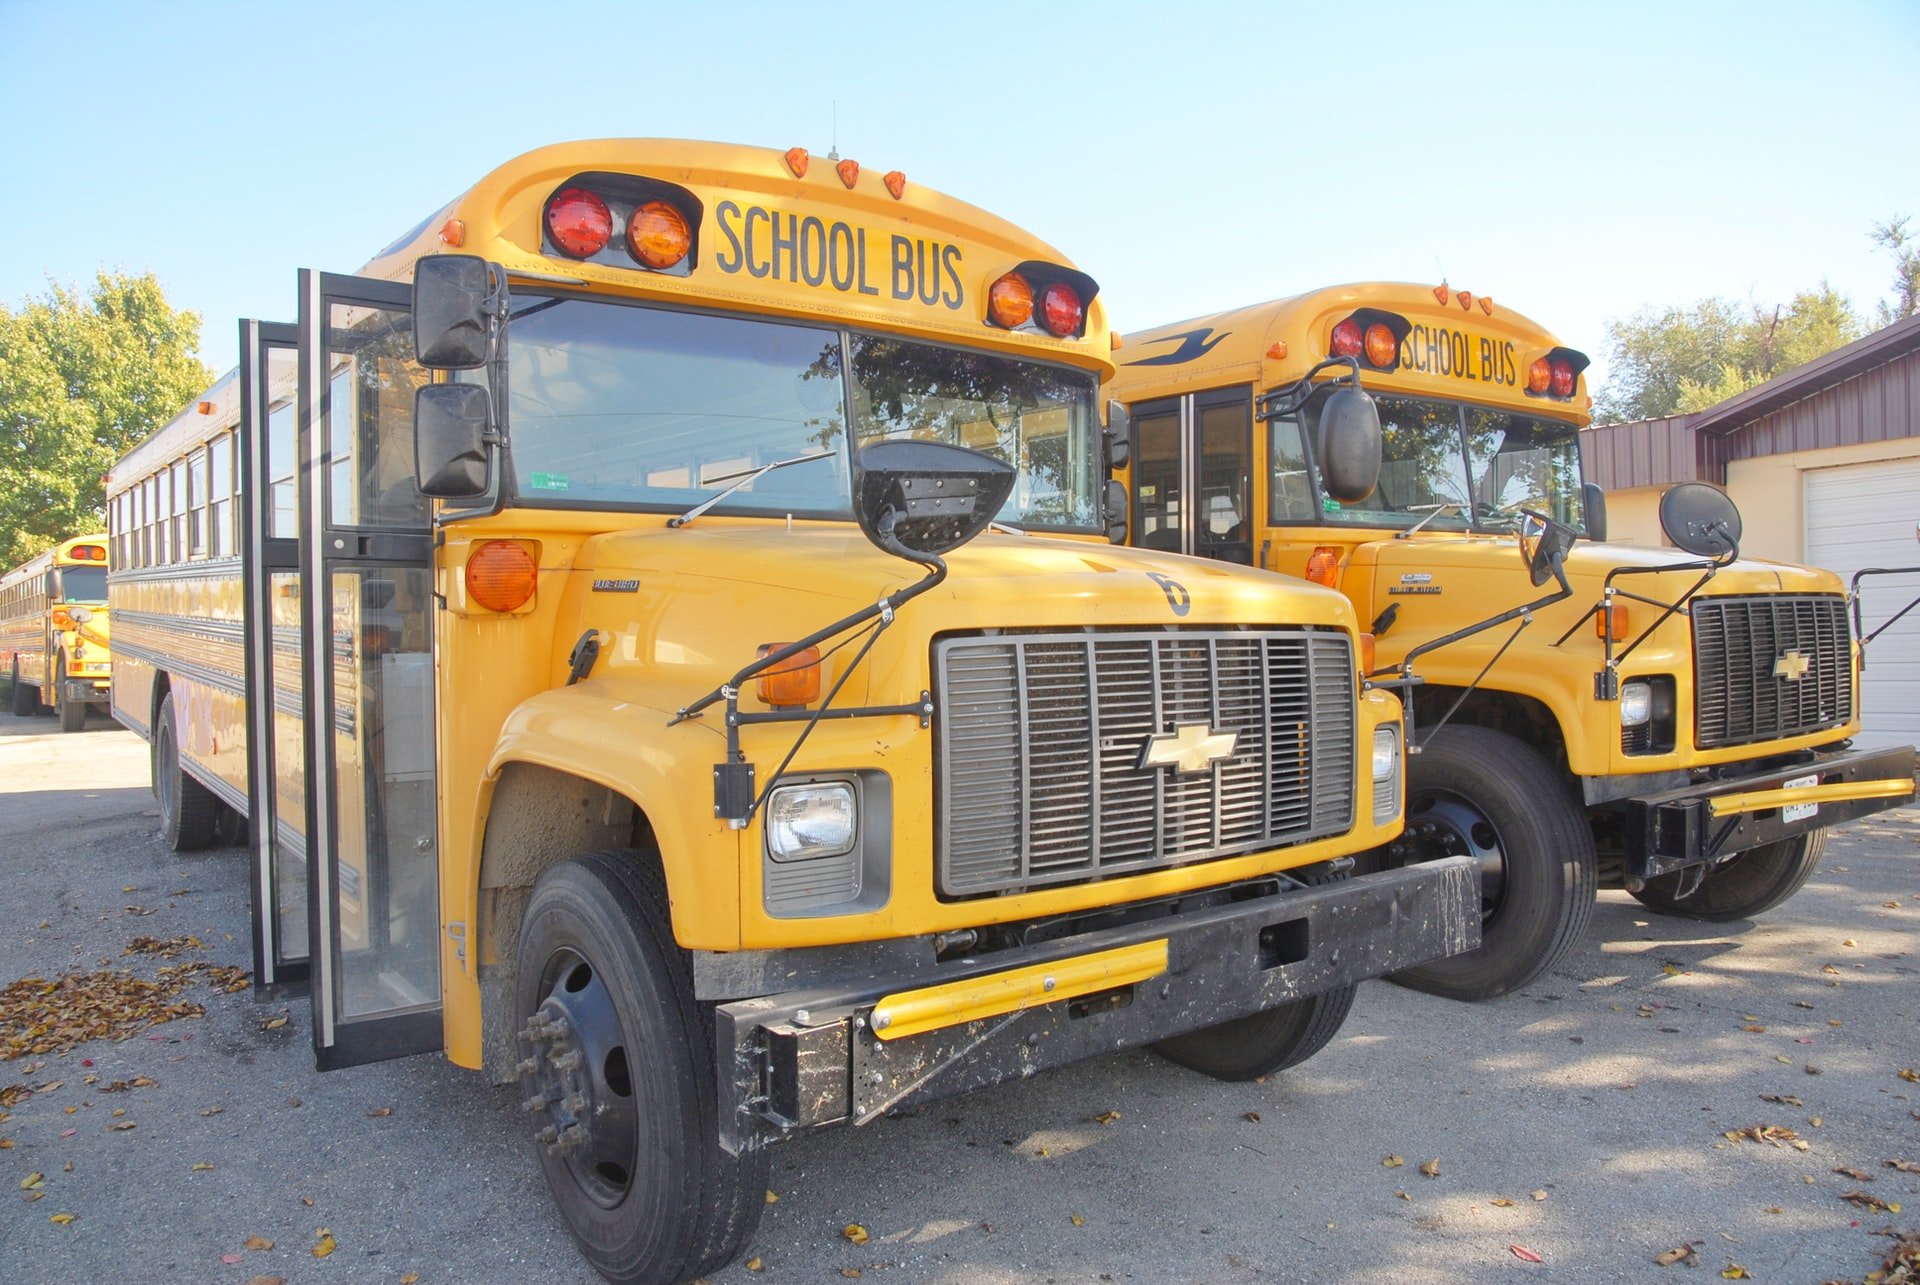 OP didn't know there were two identical school buses | Source: Unsplash